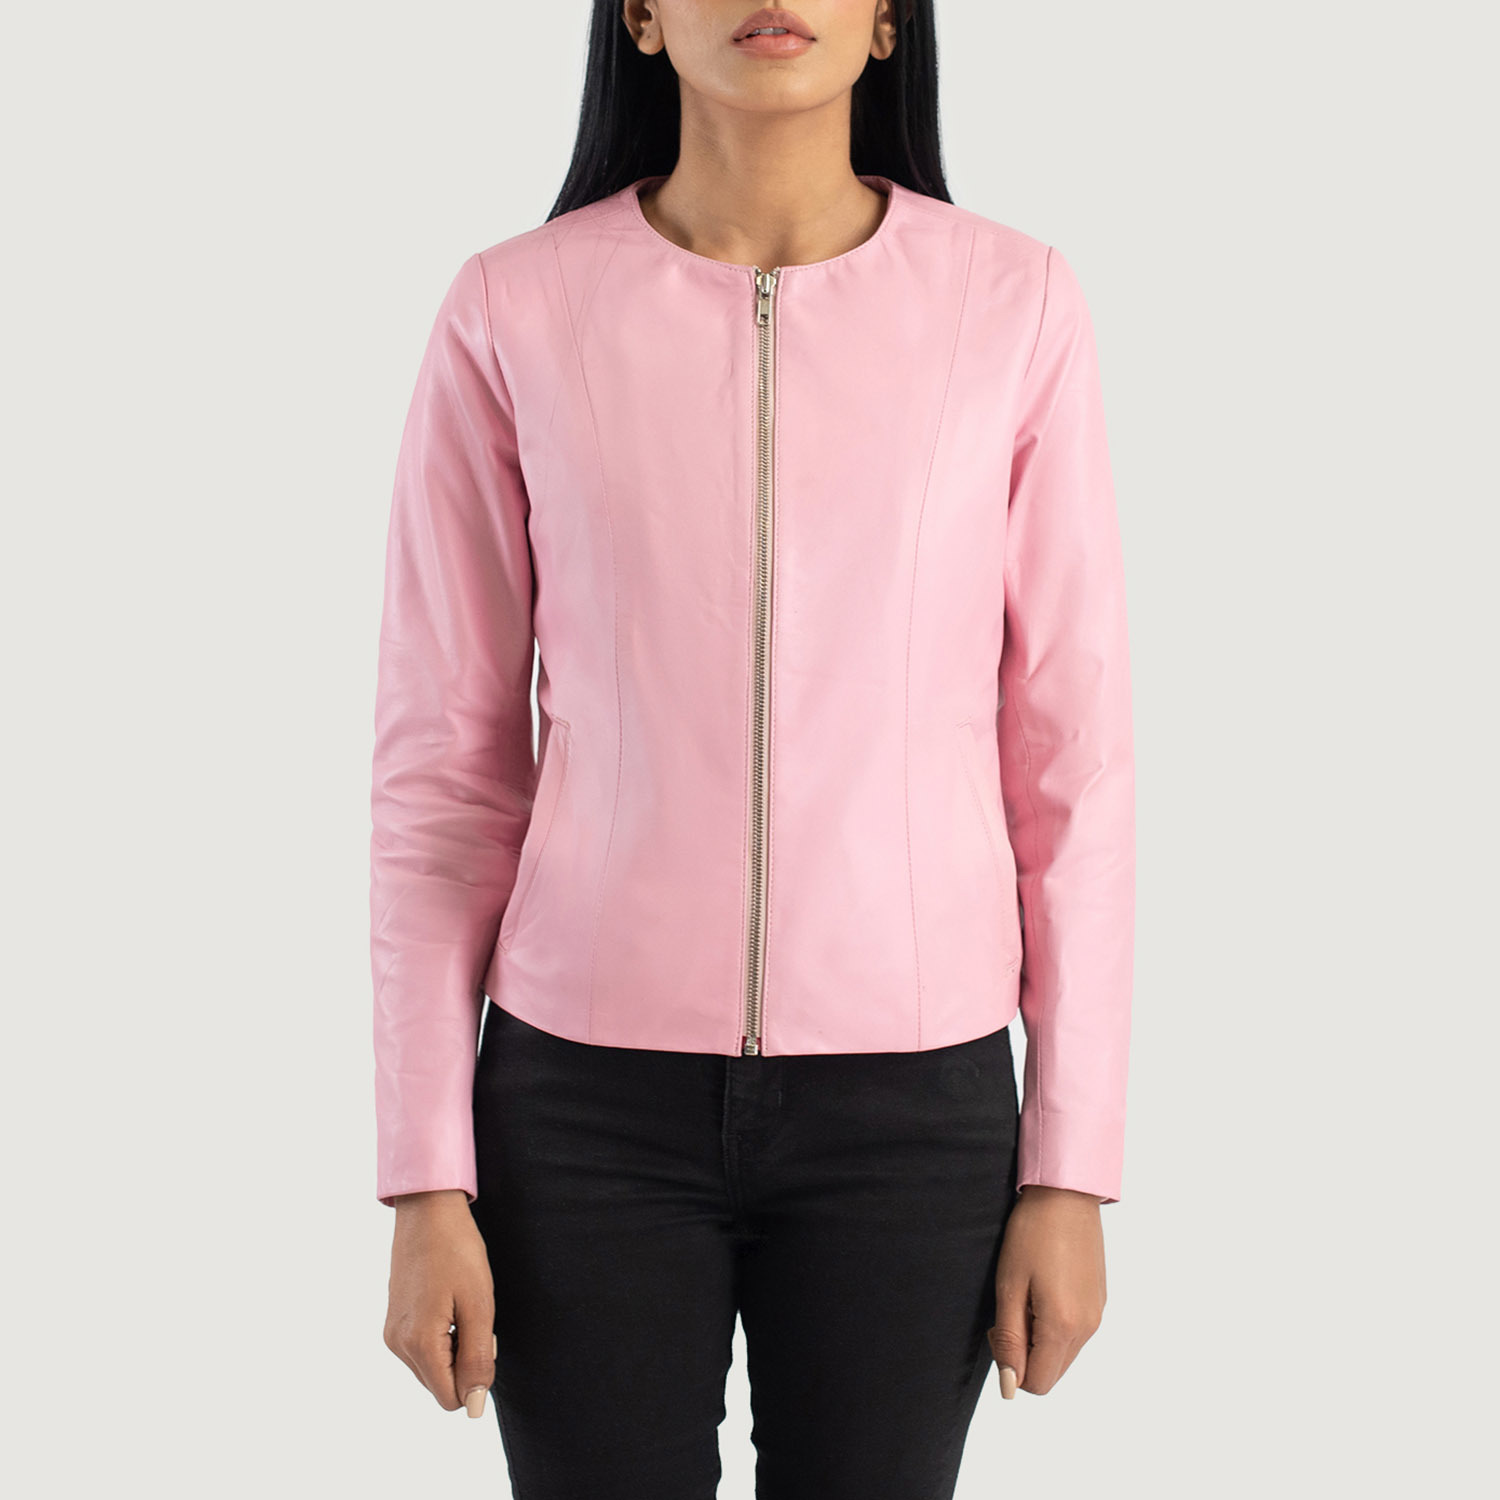 Primary image for LE Elixir Pink Collarless Leather Jacket